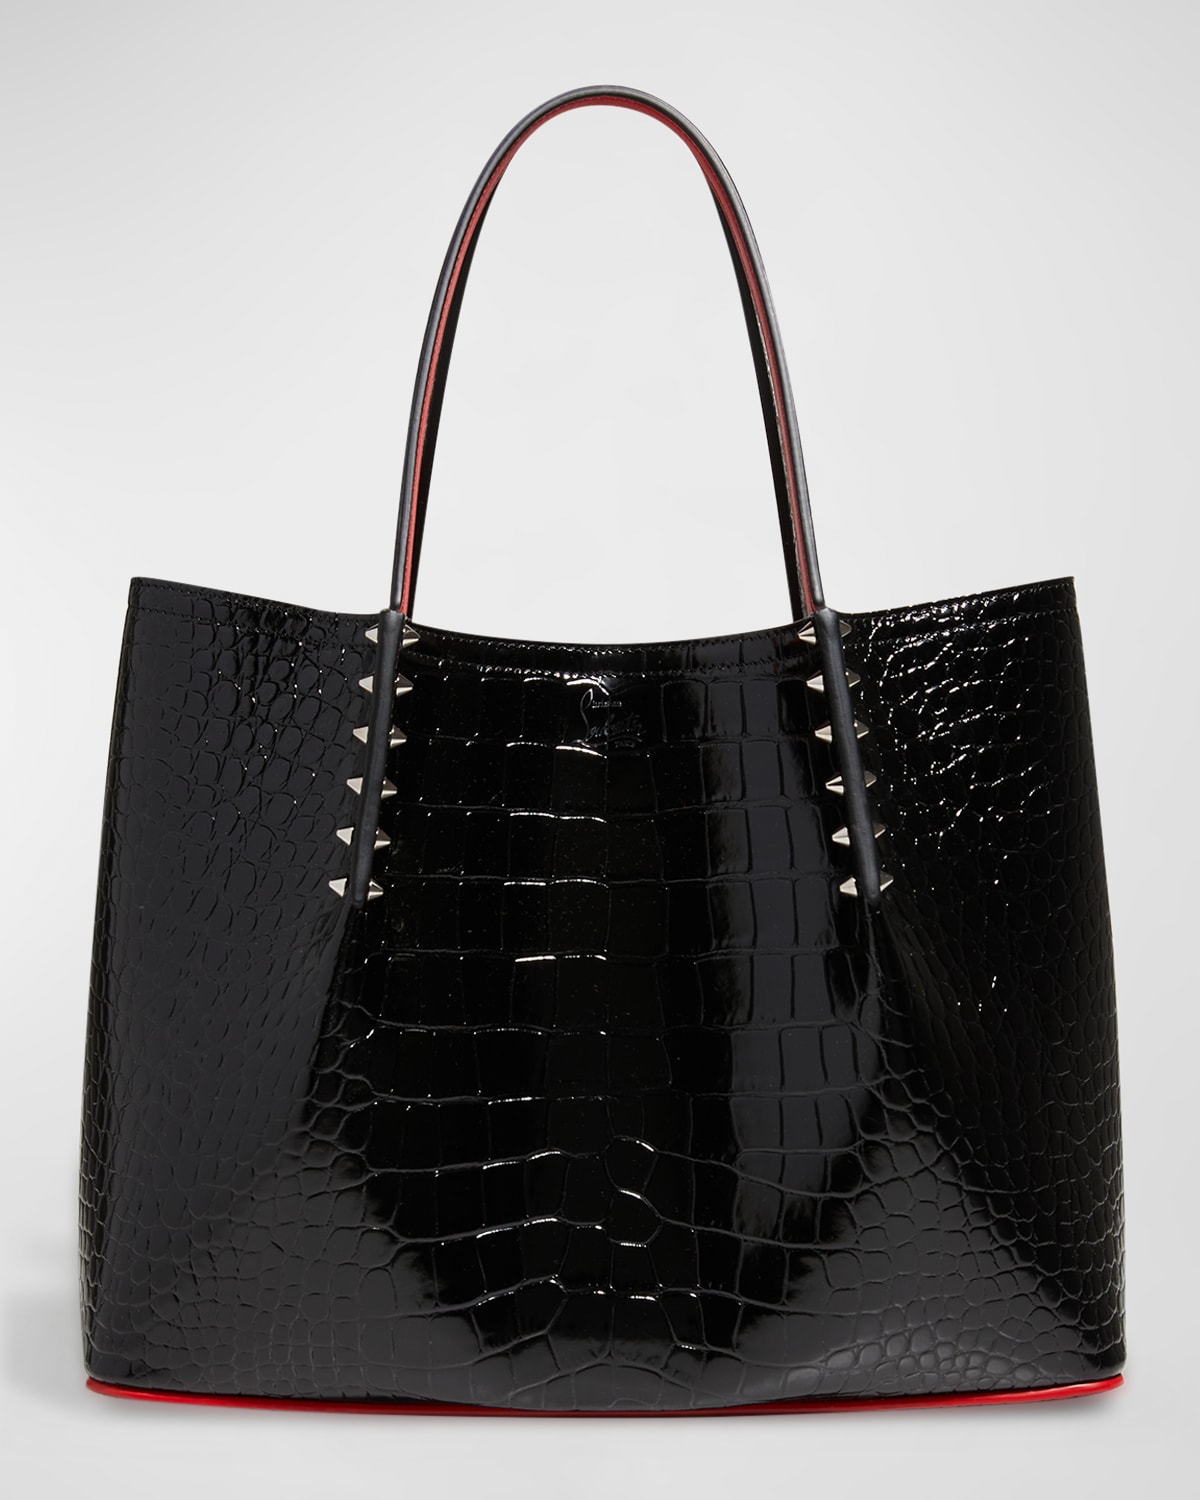 Christian Louboutin Cabarock Small Mock-croc Spiked Shopper Tote Bag In Biscotto